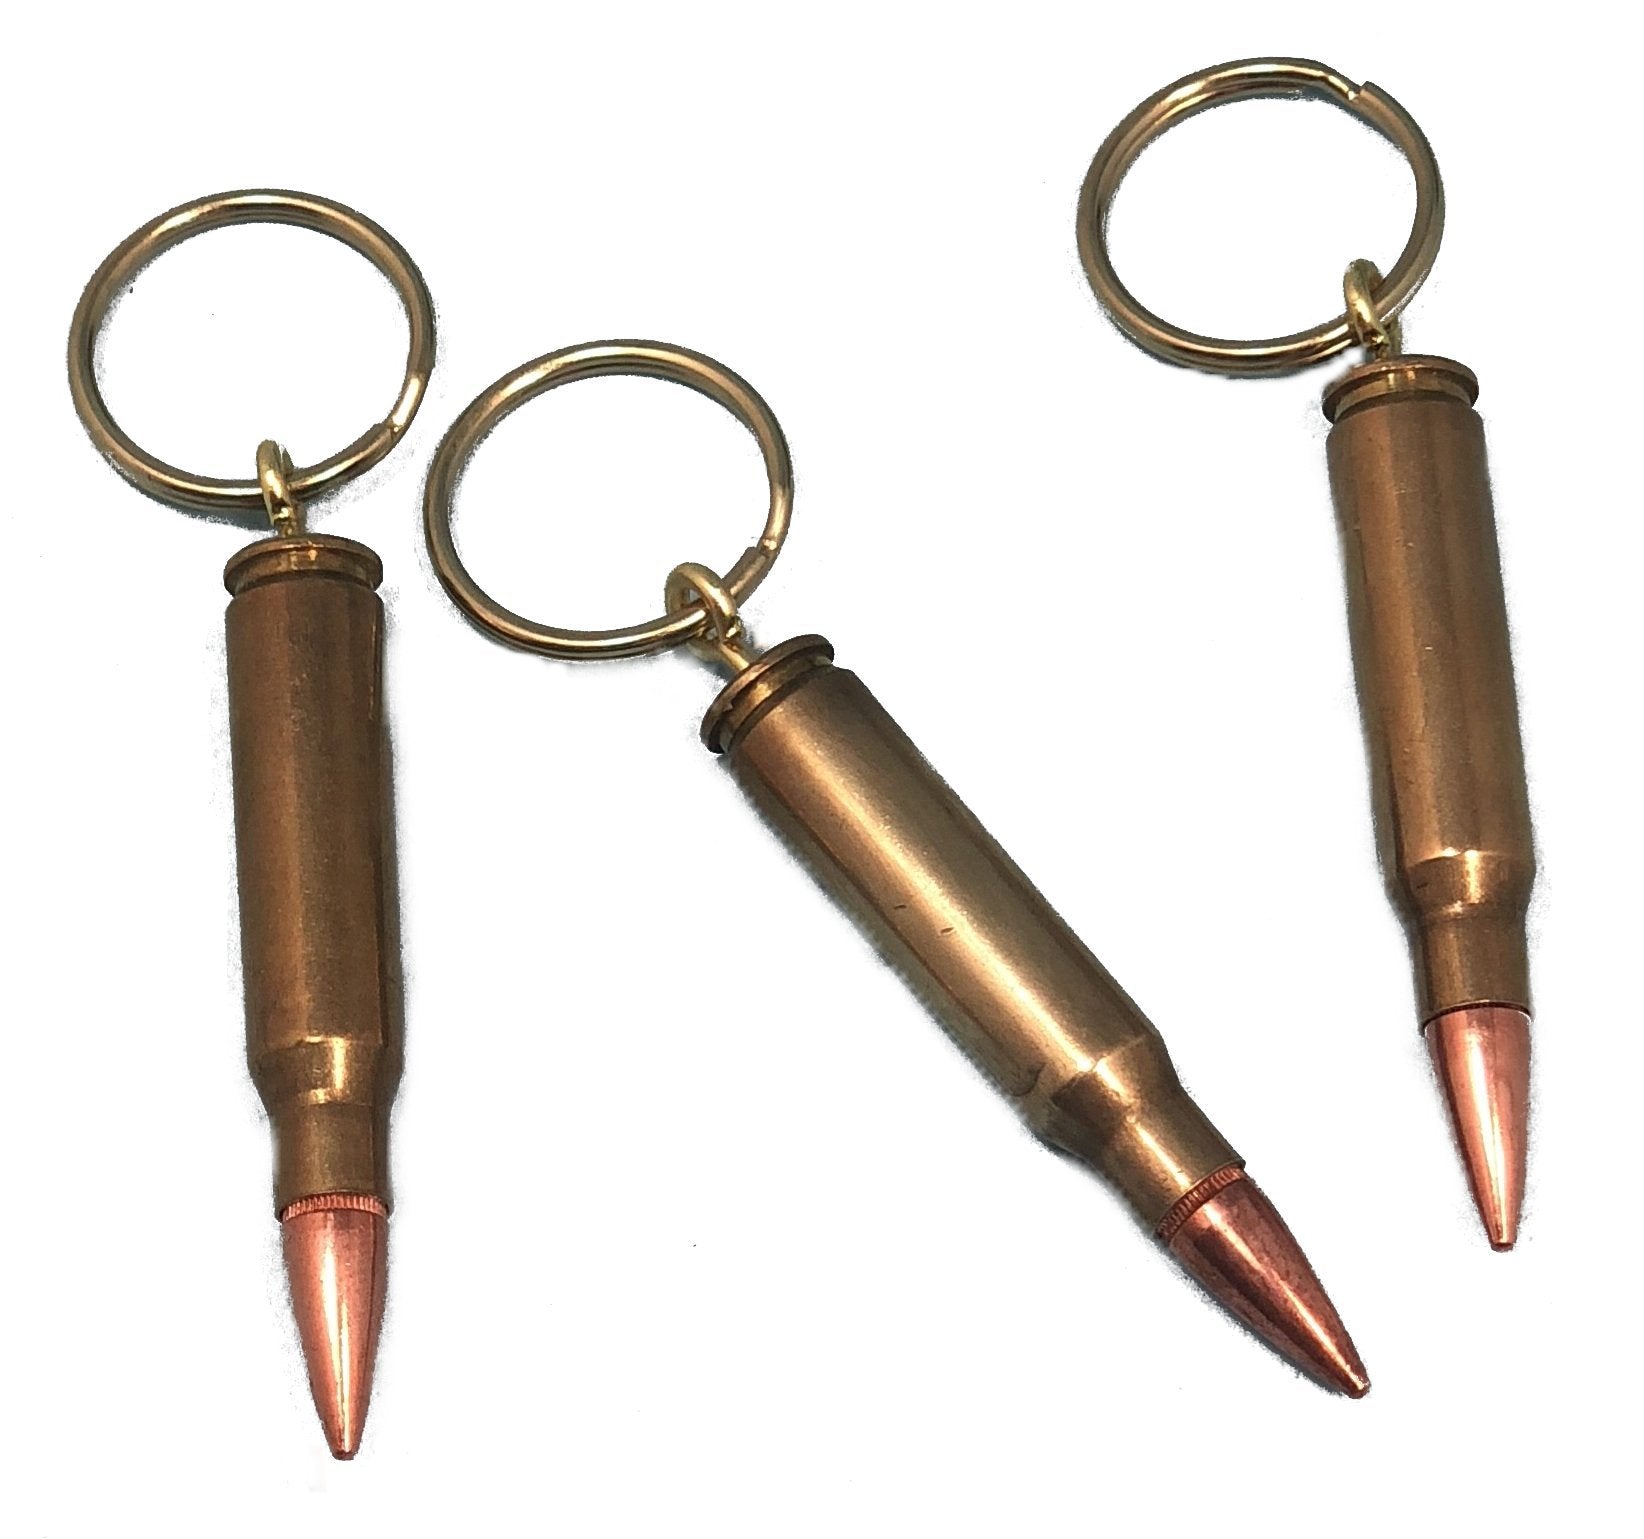 Bullet - 223 Rifle Bullet Keyring/Metal Shaped Keychain/Creative Key Charm  - Shop The Gentry & Co. Keychains - Pinkoi